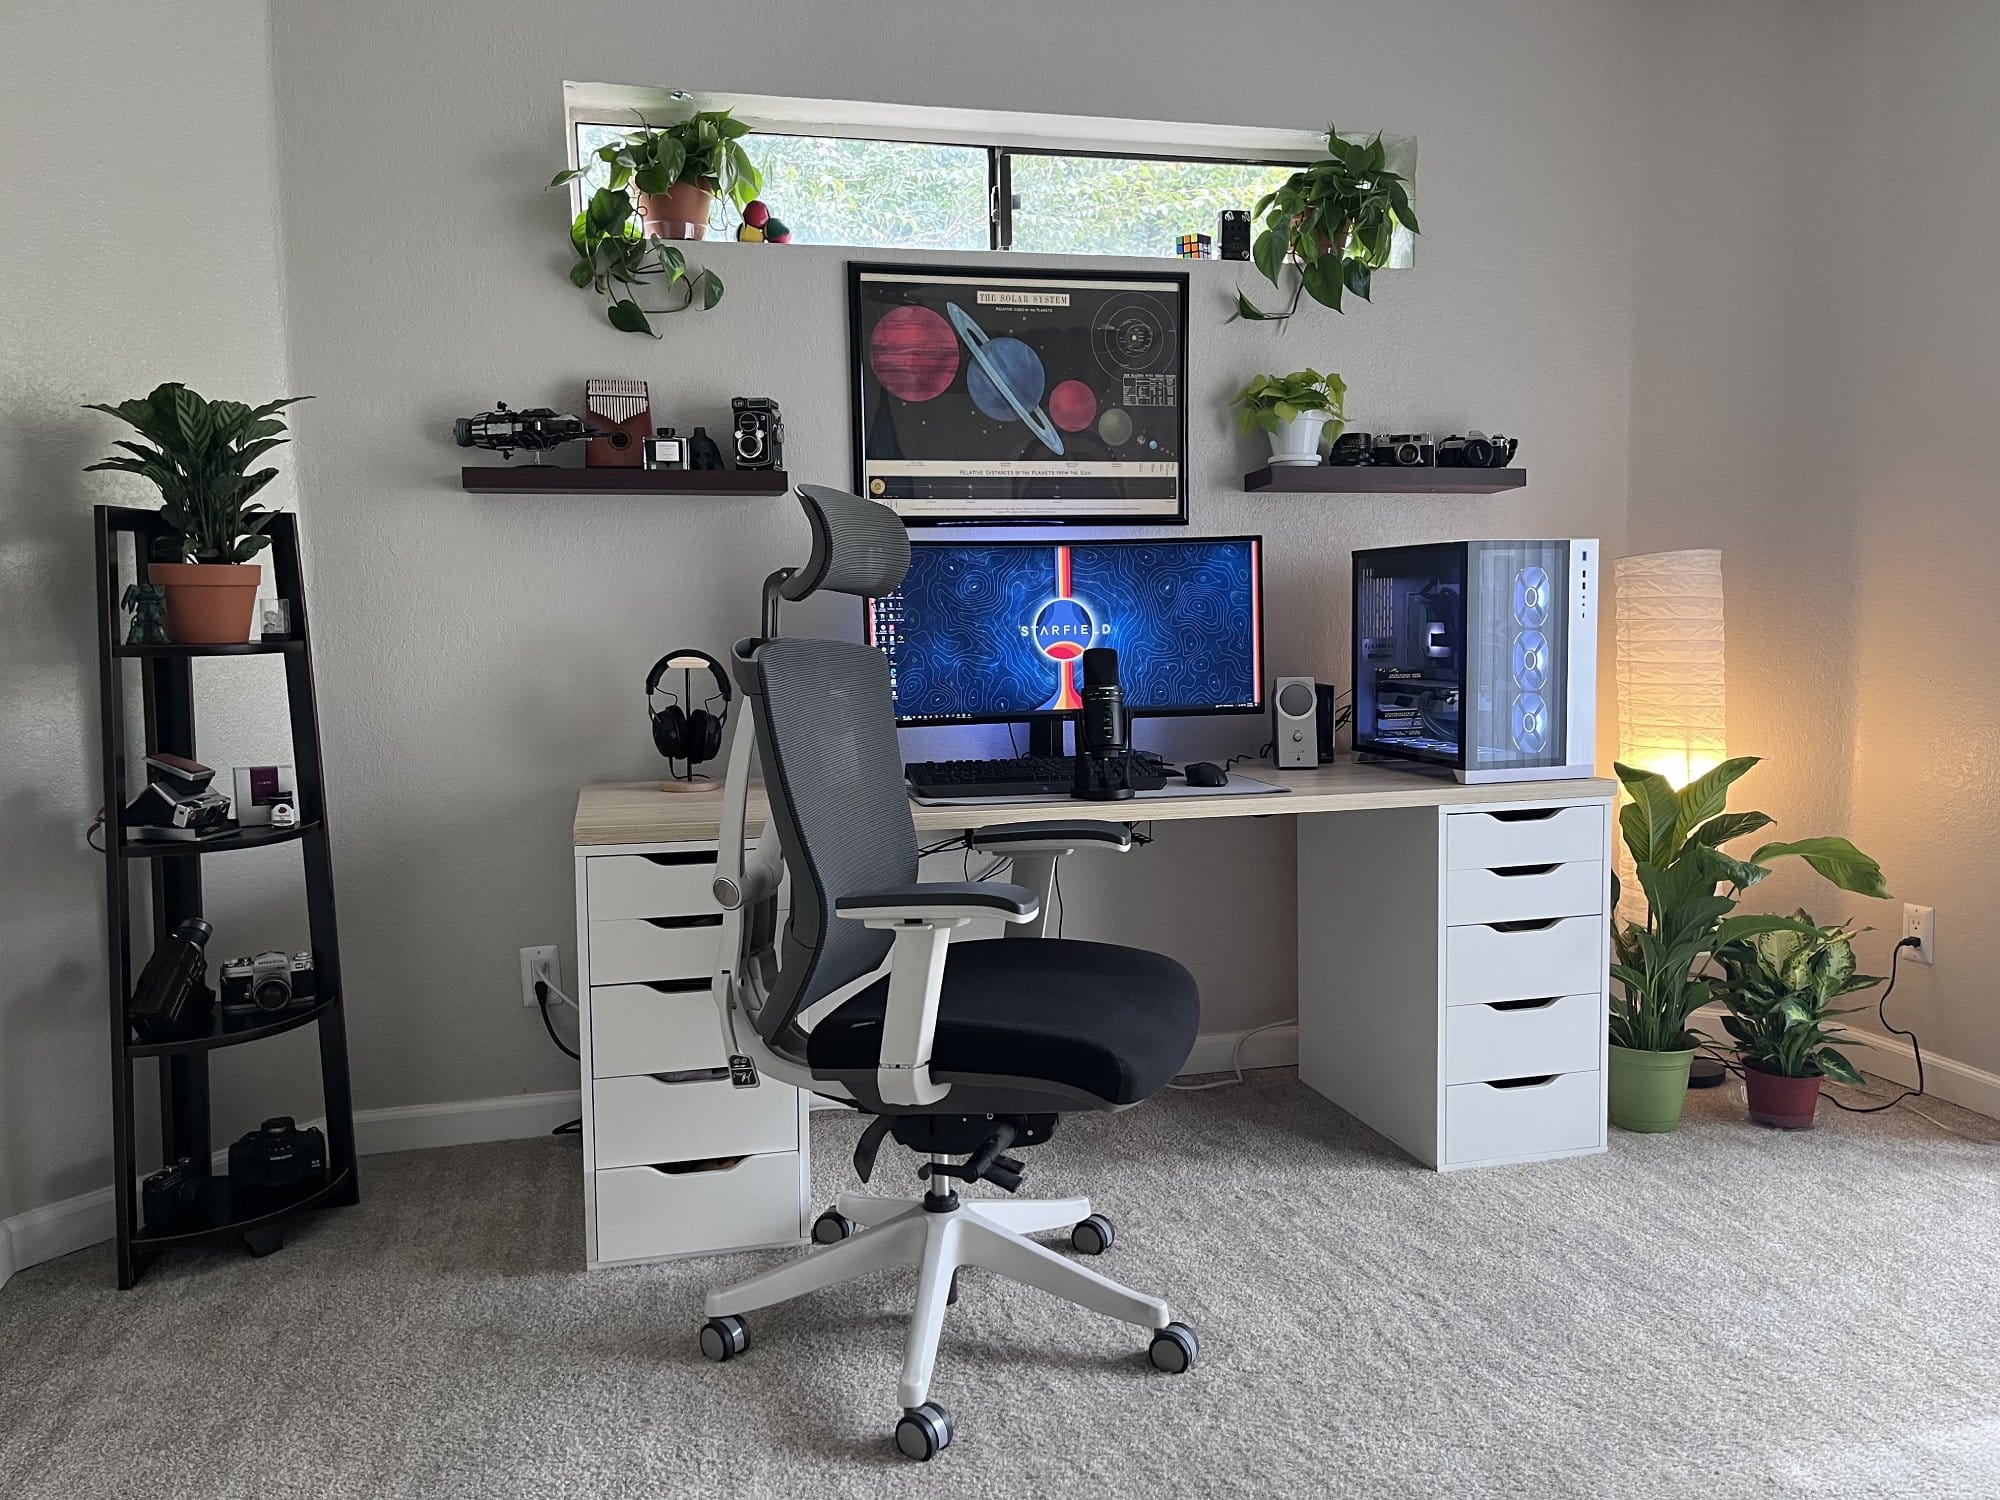 A home office setup featuring a white desk with a large curved monitor, a computer tower, houseplants, an ergonomic chair, and a shelf with photography equipment